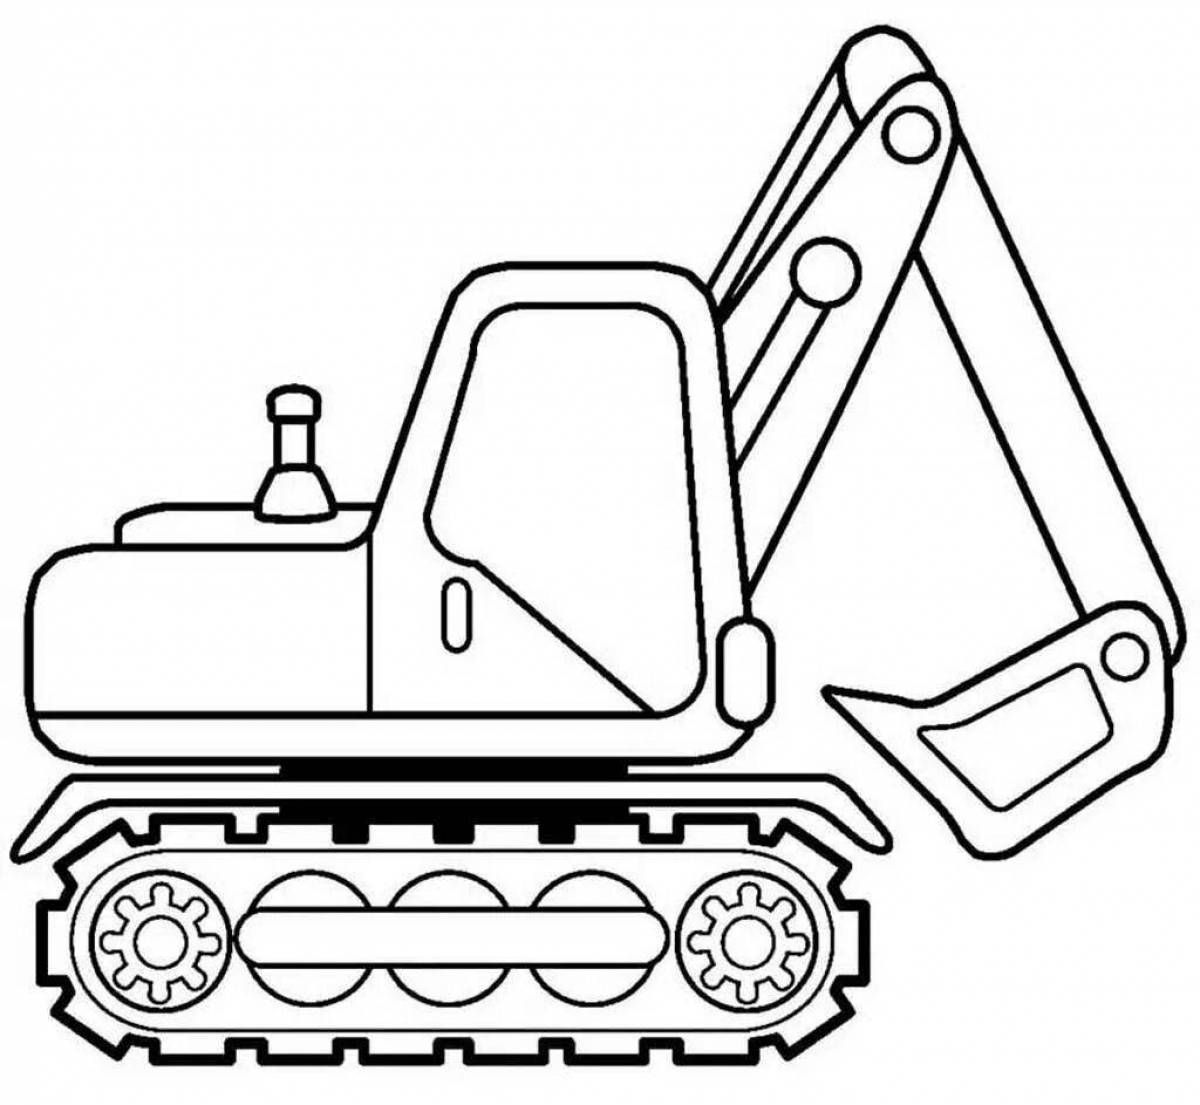 Bright excavator coloring for boys